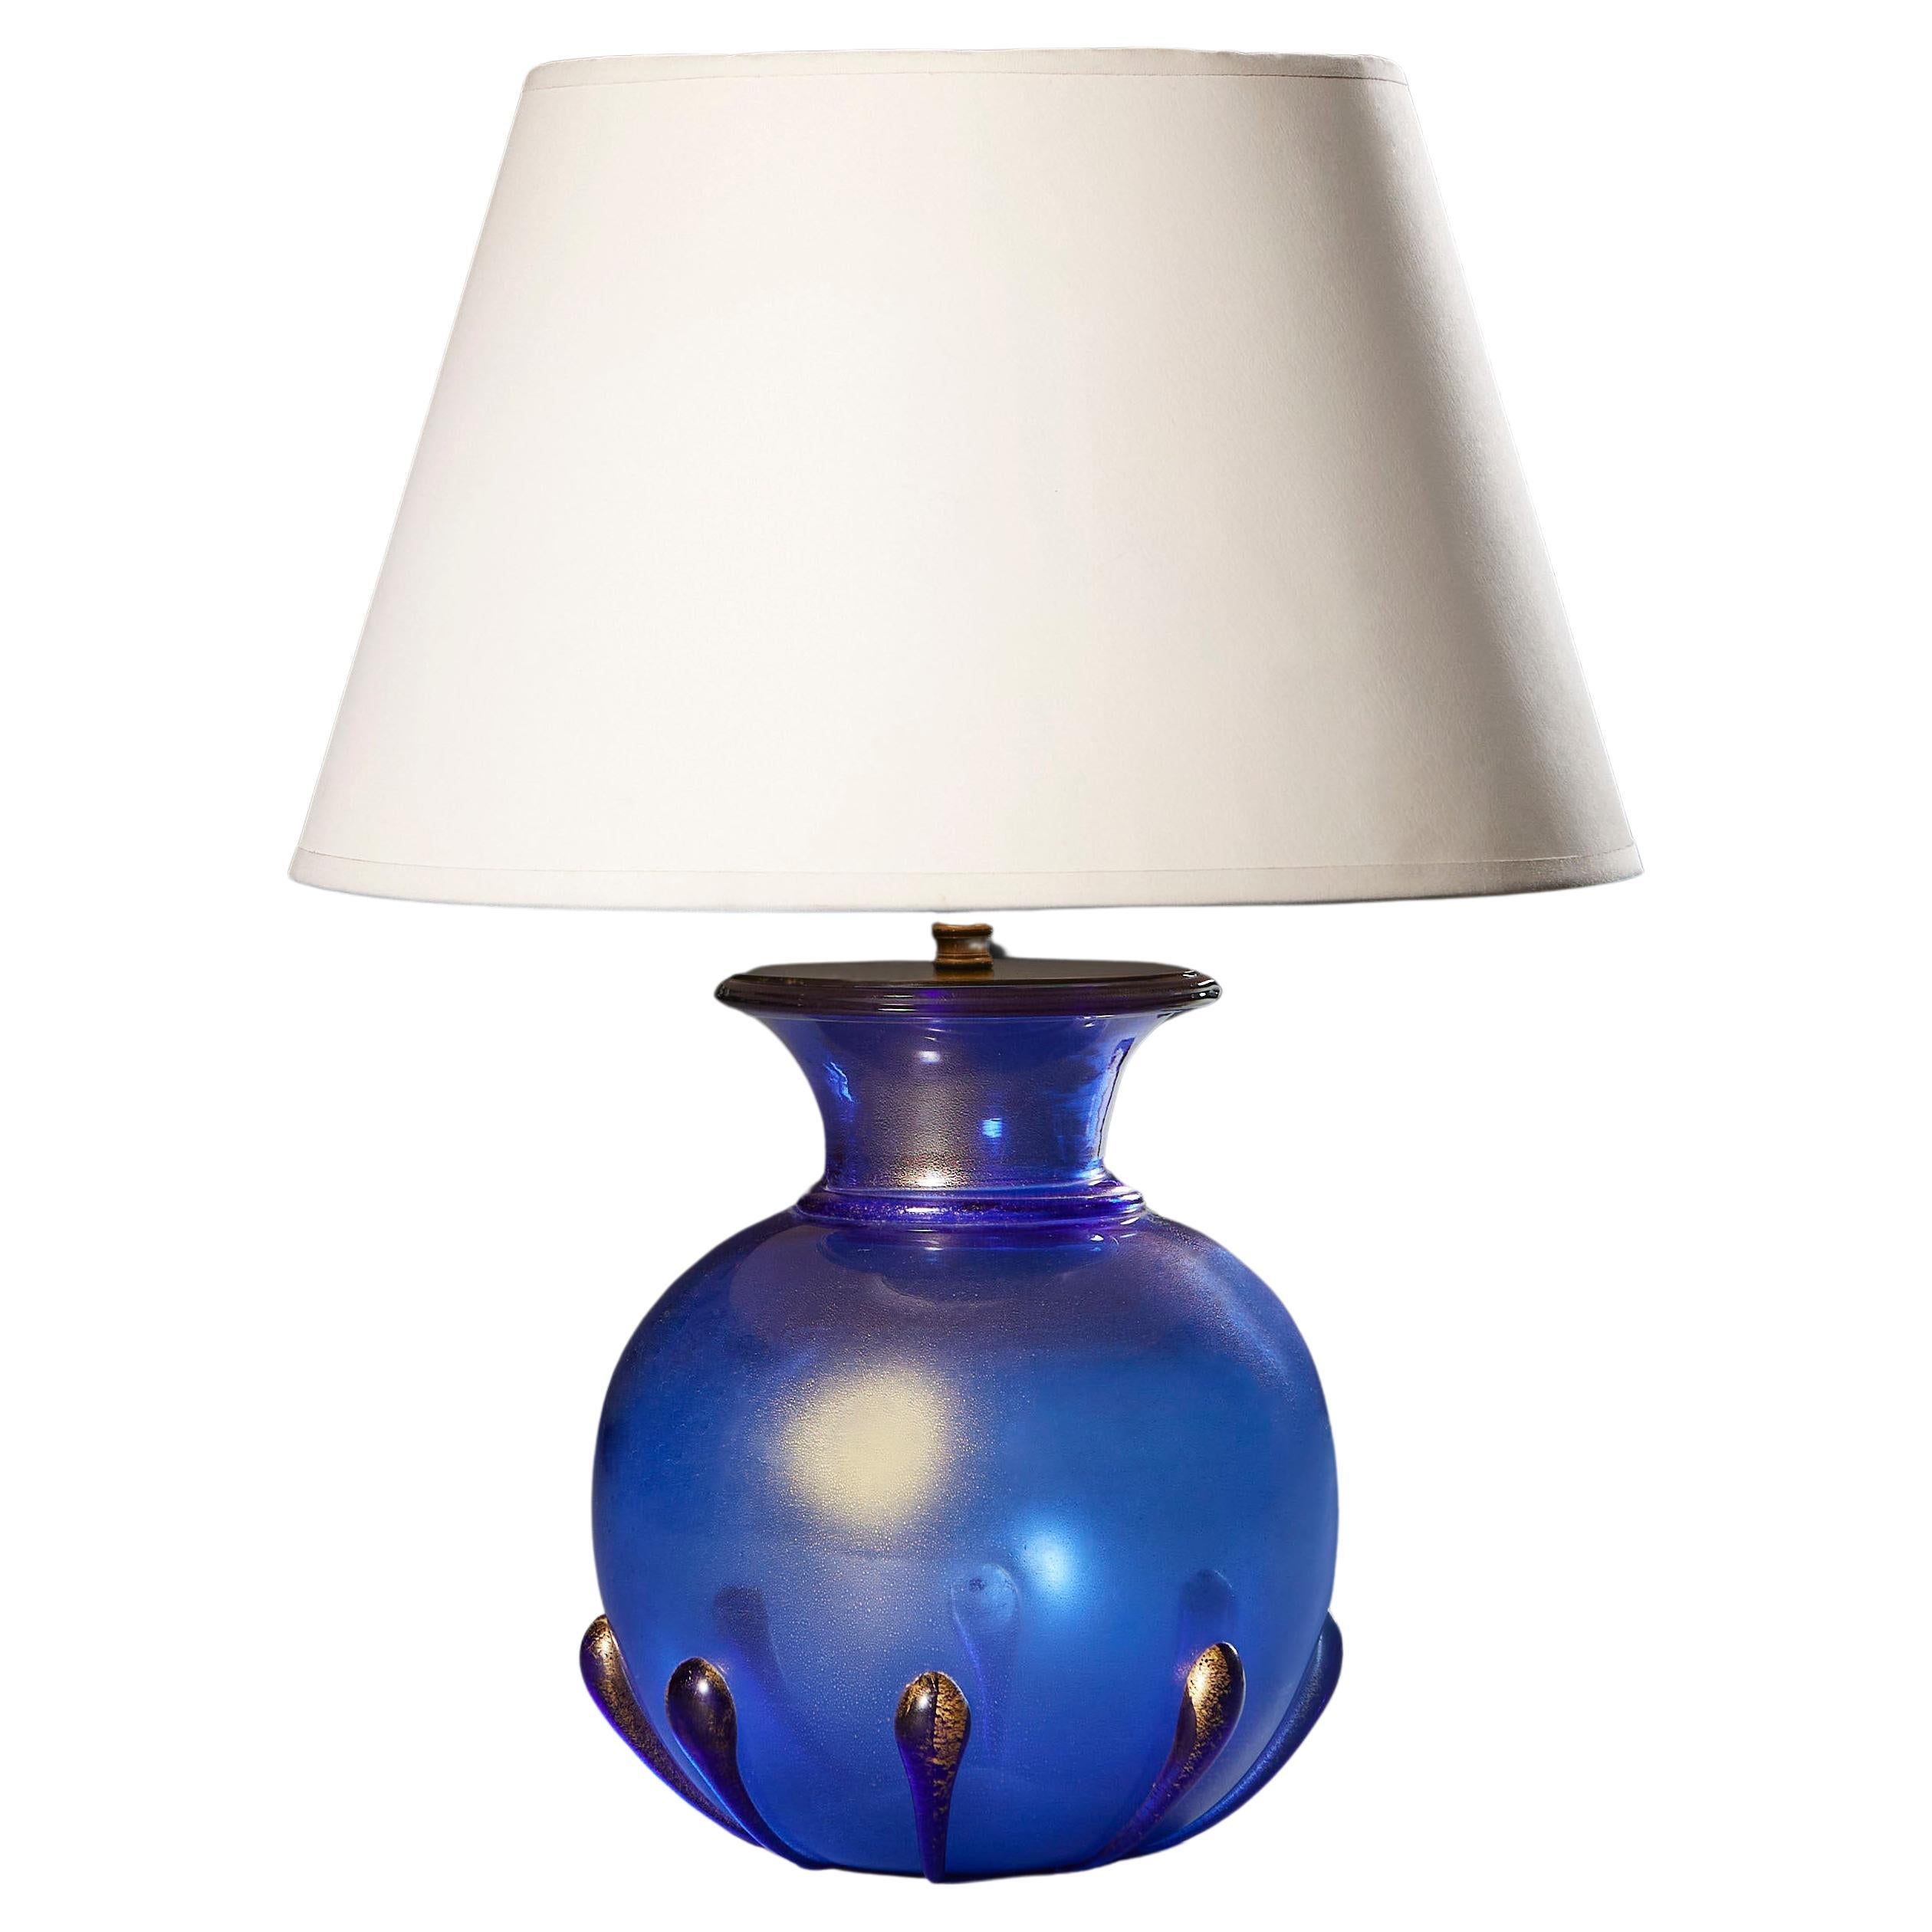 A Blue and Gold flecked Murano Glass Vase as a Lamp